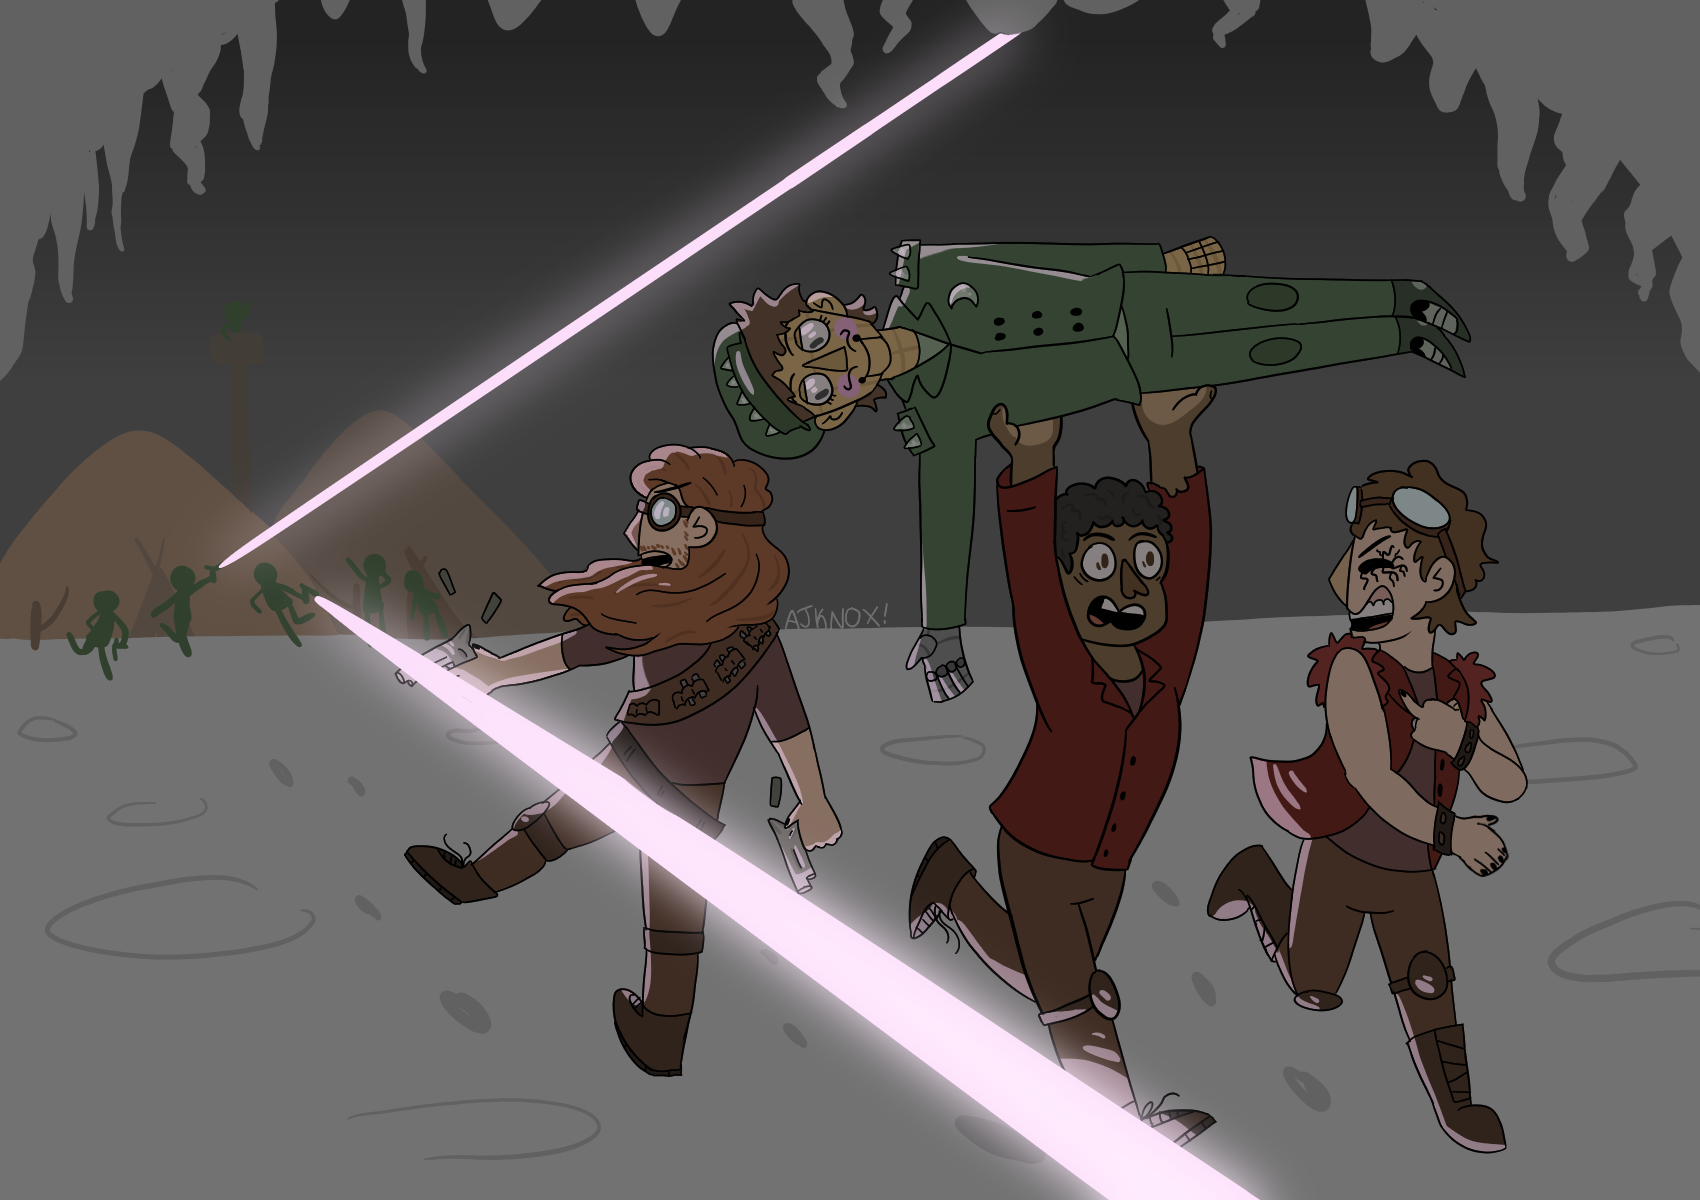 fanart of characters from the mechanisms. the characters in focus are running from a military camp firing plasma beams at them, all wearing red outfits color save for the toy soldier, who wears a green uniform. gunpowder tim is carrying guns and shouting, his back to the camera. jonny d'ville is laughing and giving a middle finger to the camp. bertie, a black man with short curly hair, is running with a scared expression. bertie is carrying the toy soldier above his head.